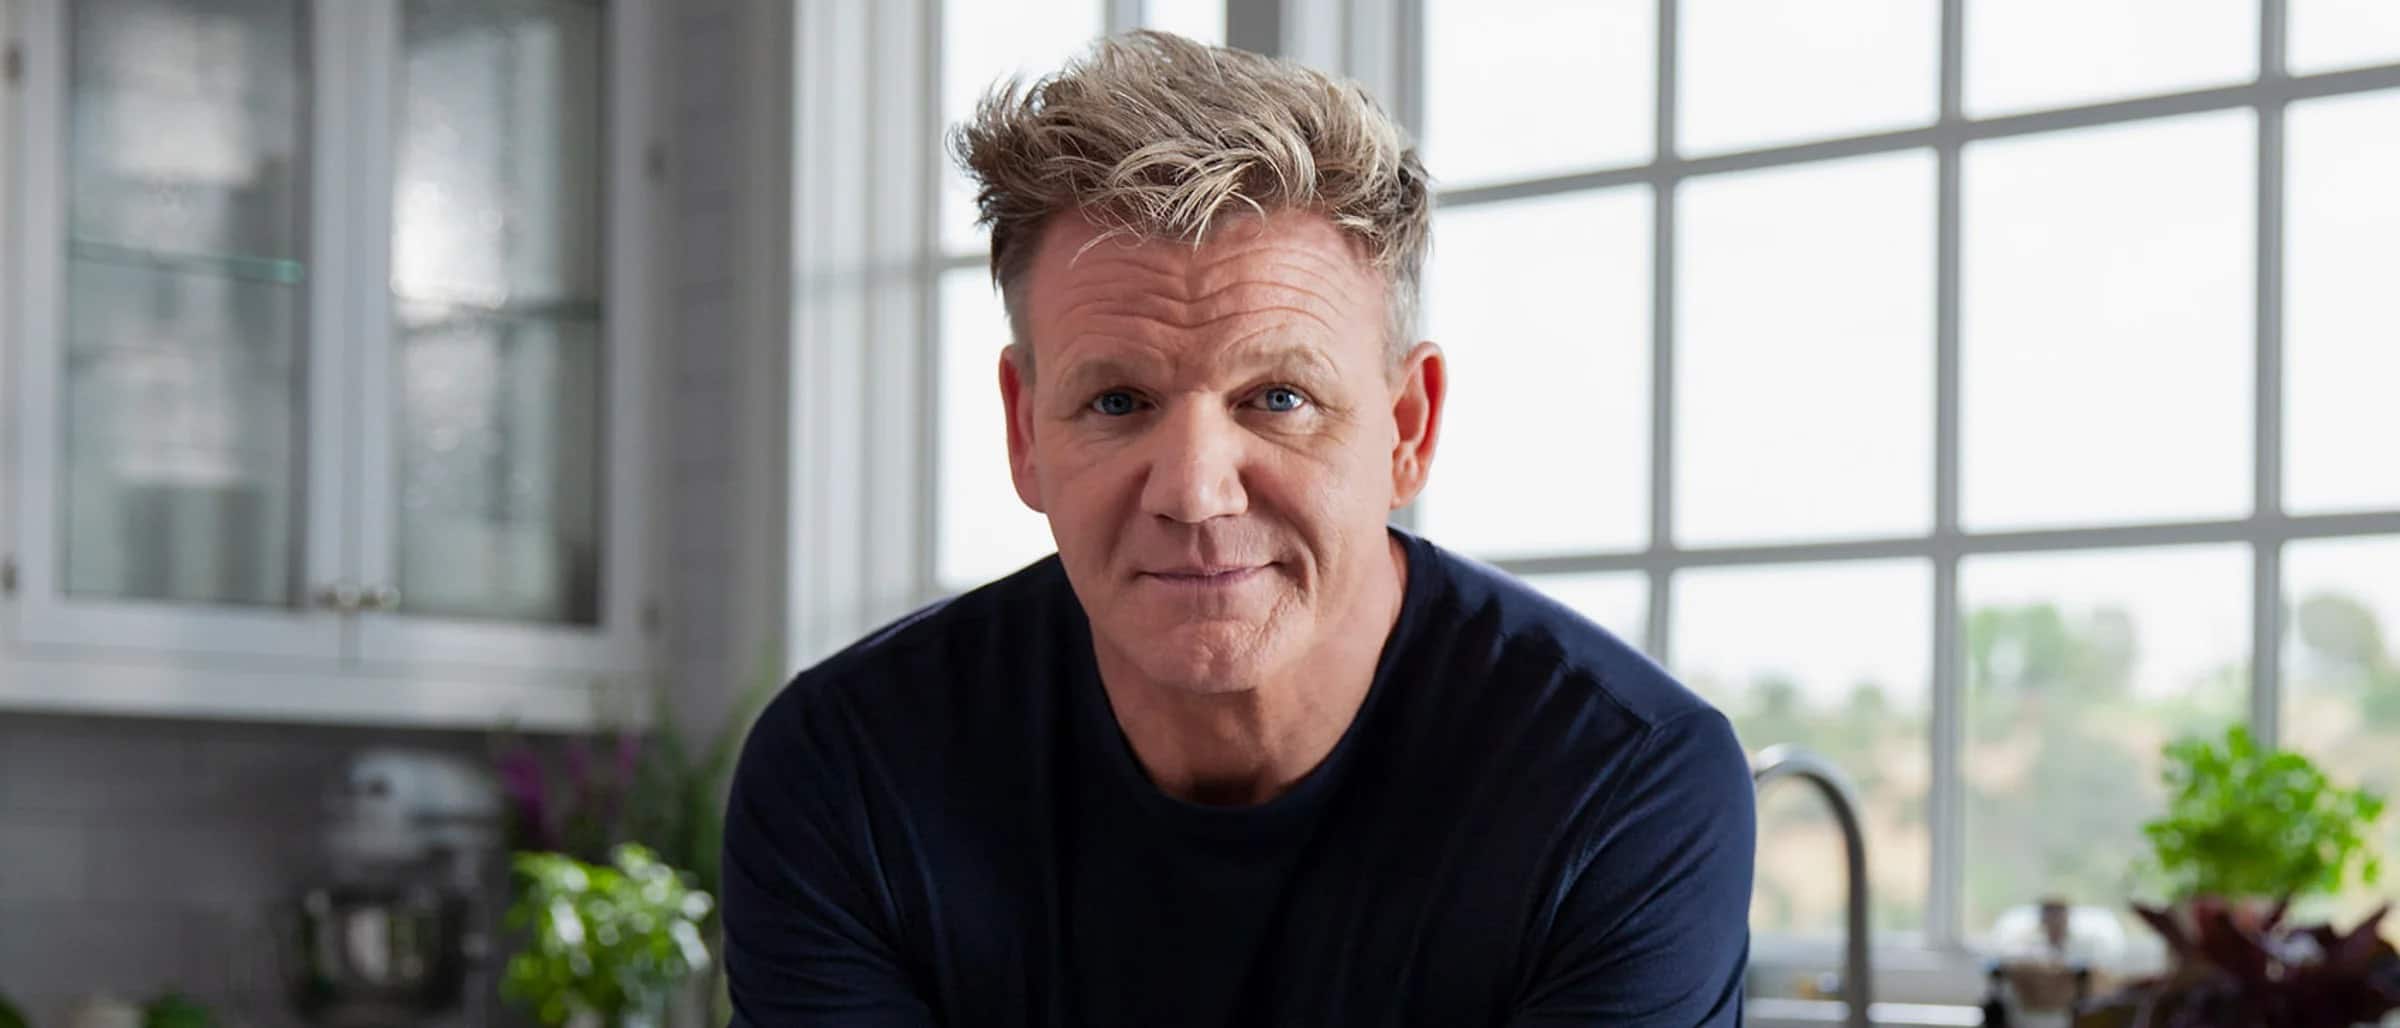 gordon ramsey teaches cooking lessons online